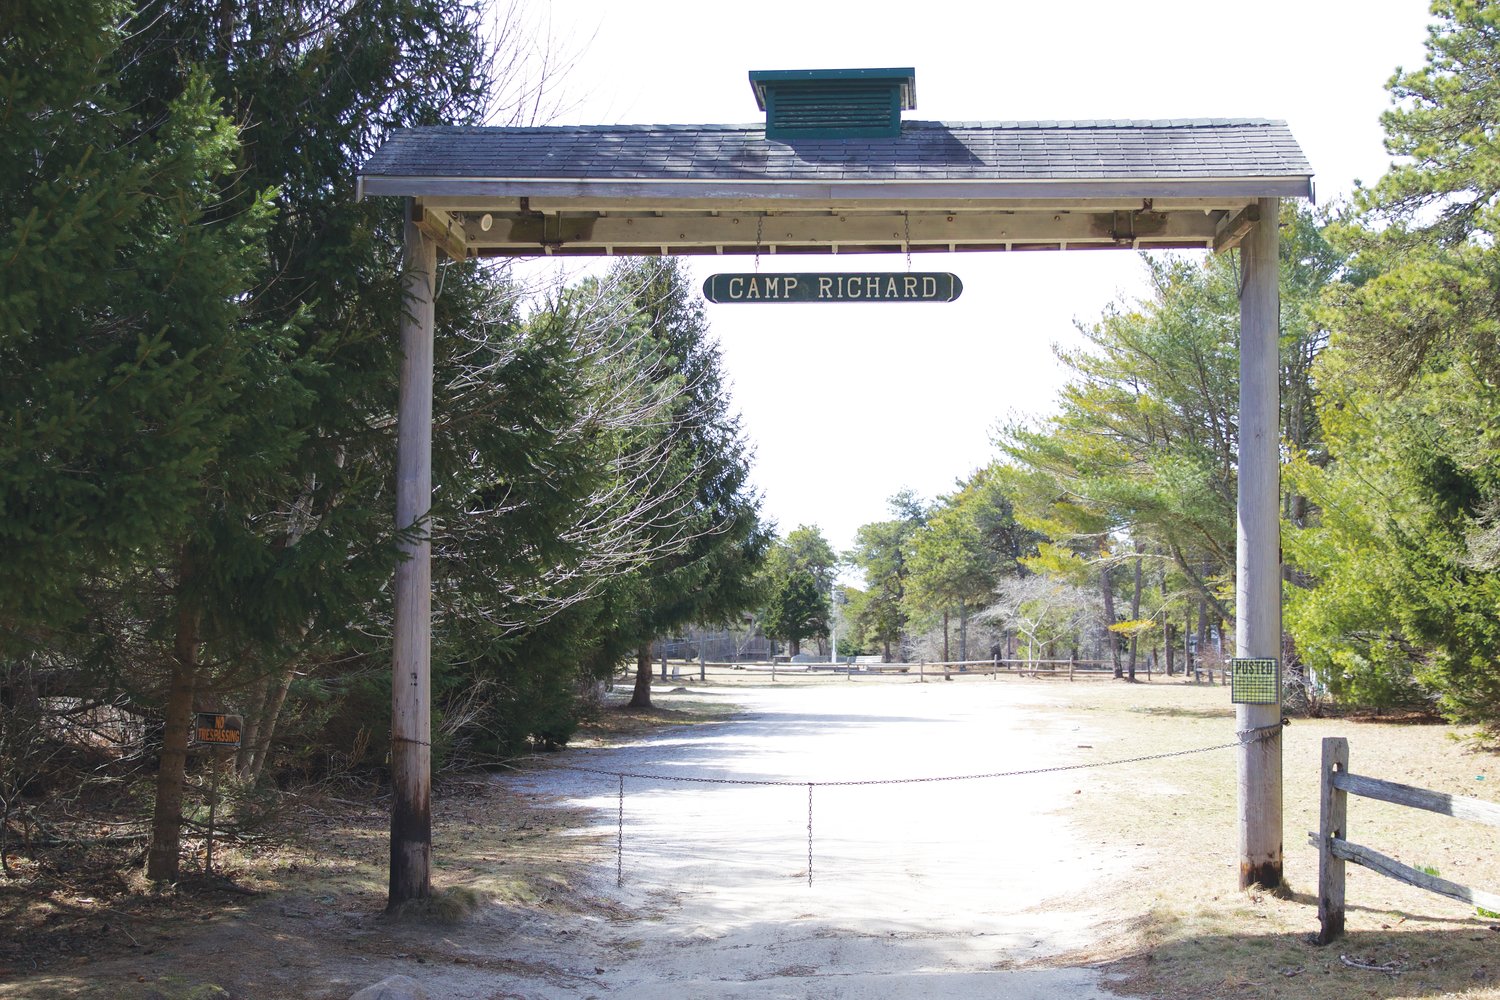 The entrance to the 100-acre Boy Scout Camp Richard near the state forest off Lovers Lane.